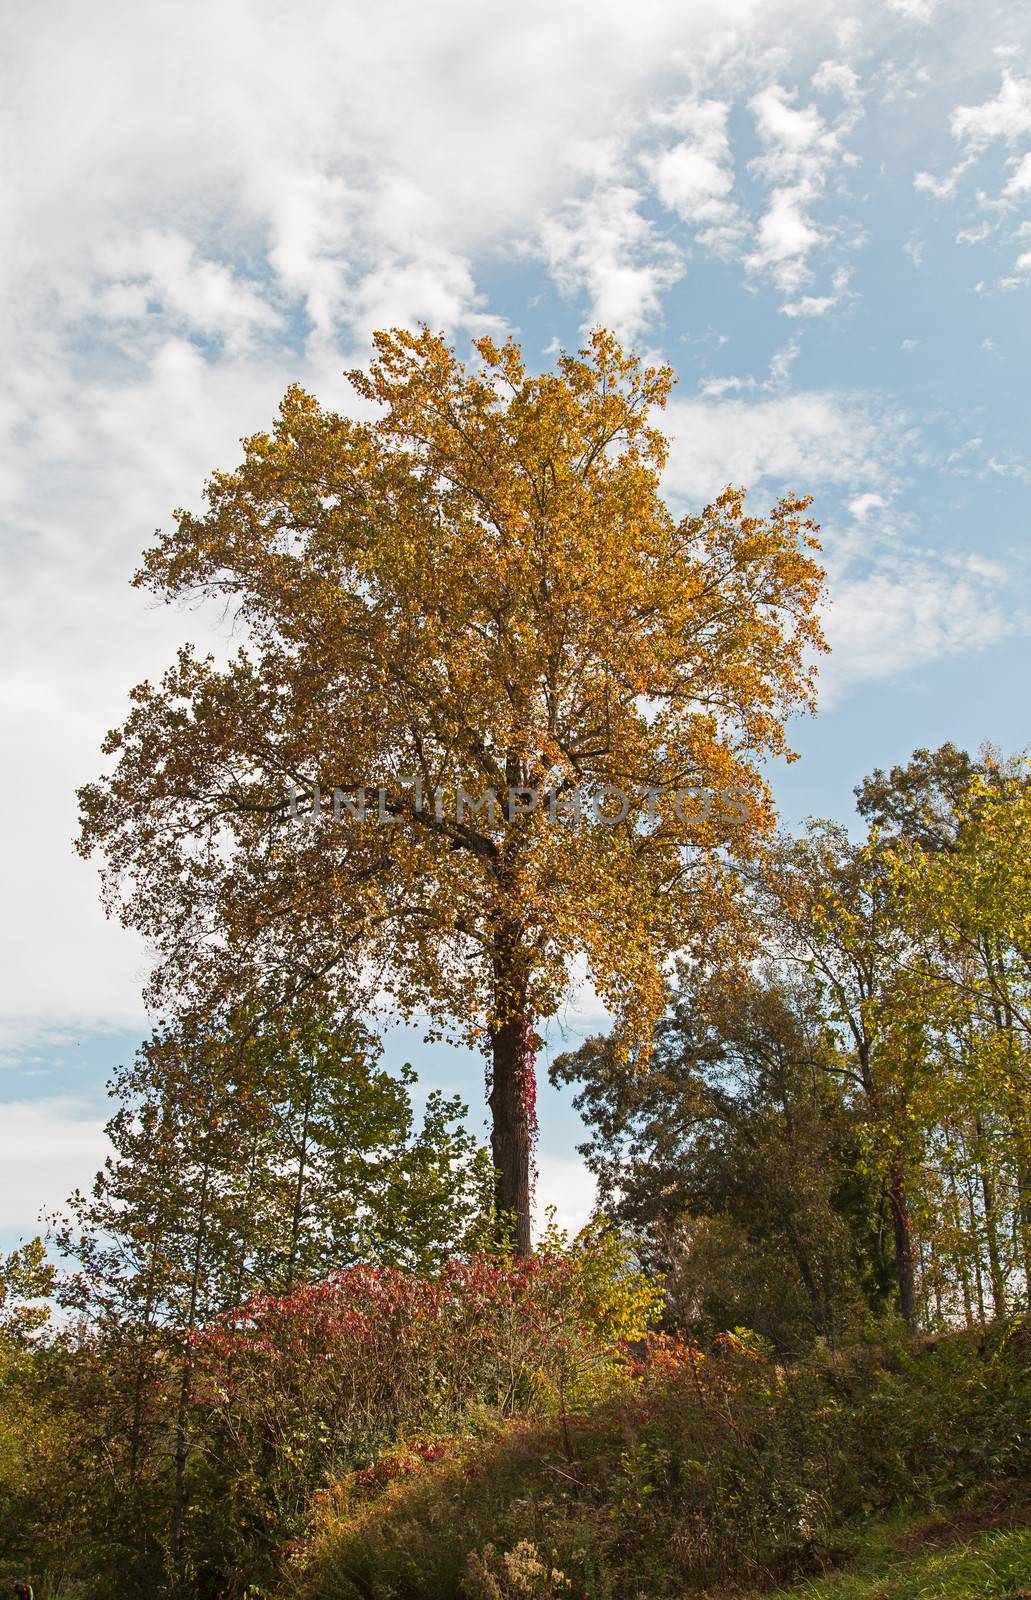 This tree, going through Autumn color changes, sits on a hill overlooking the Valley River in Murphy, North Carolina.